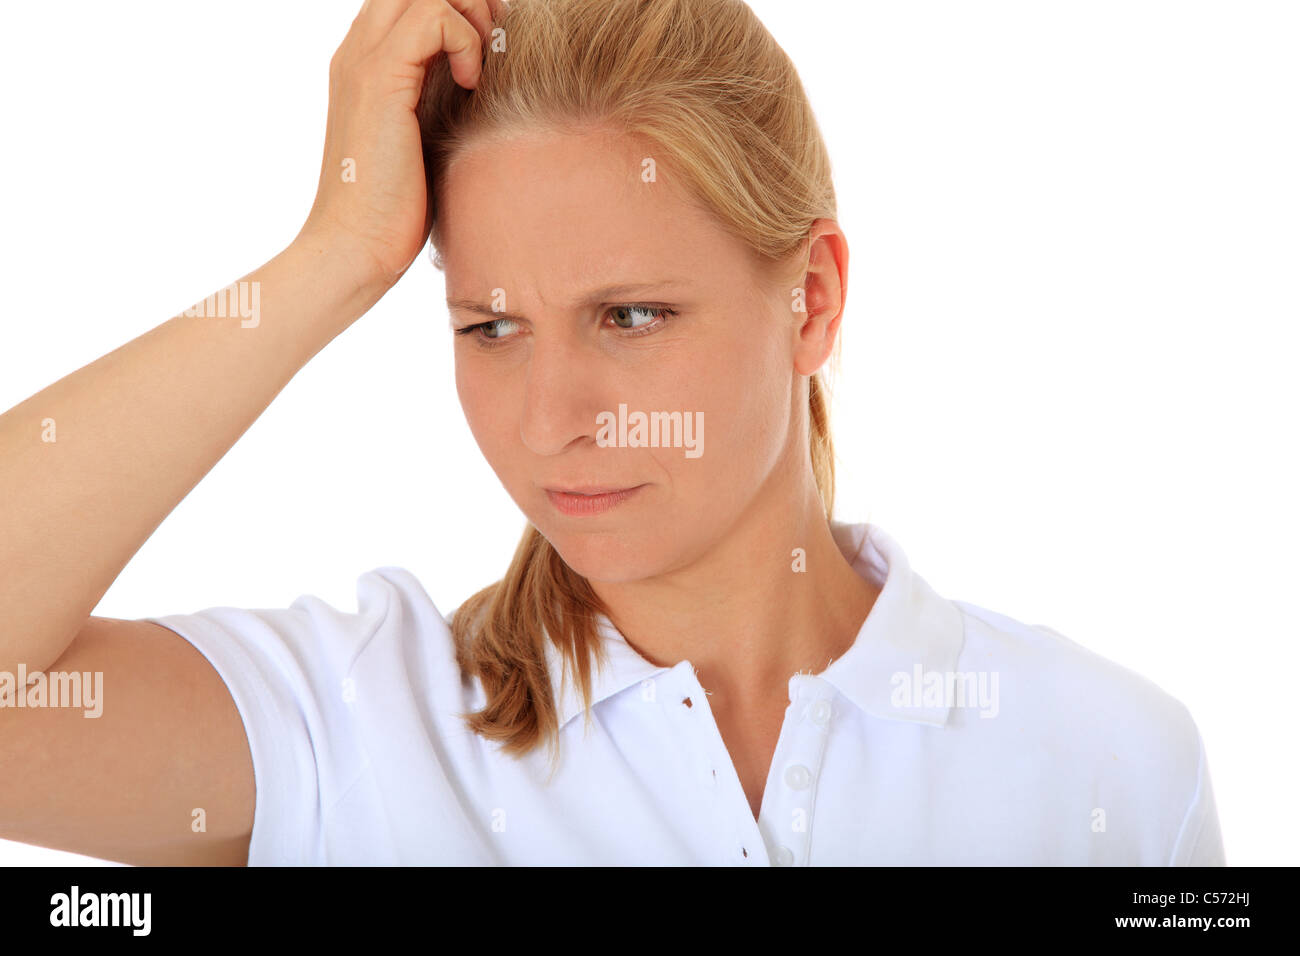 Woman deliberates a decision. All on white background. Stock Photo